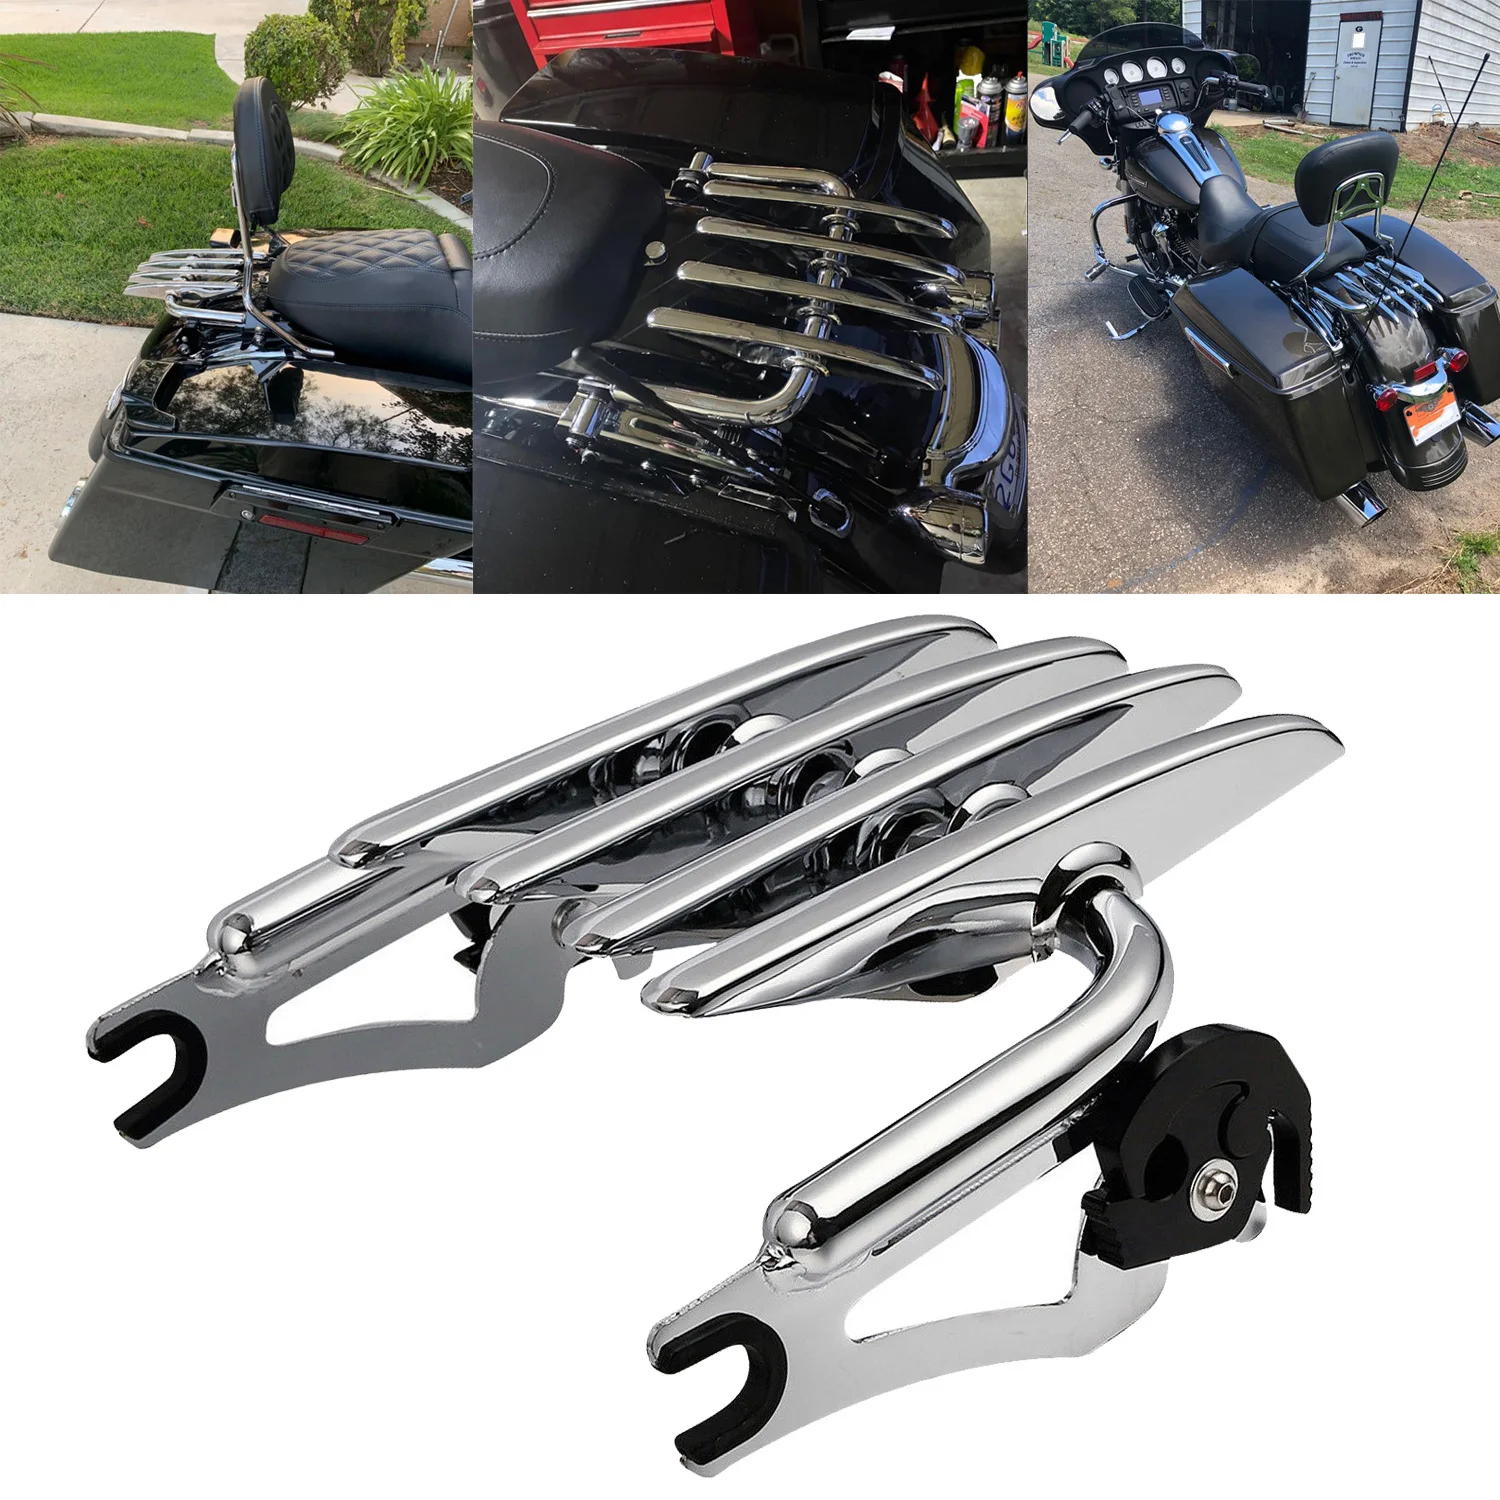 Chrome Detachable Two-Up Stealth Mounting Luggage Rack For Harley Touring Street Electra Glide Road King FLHT FLHX 2009-2023